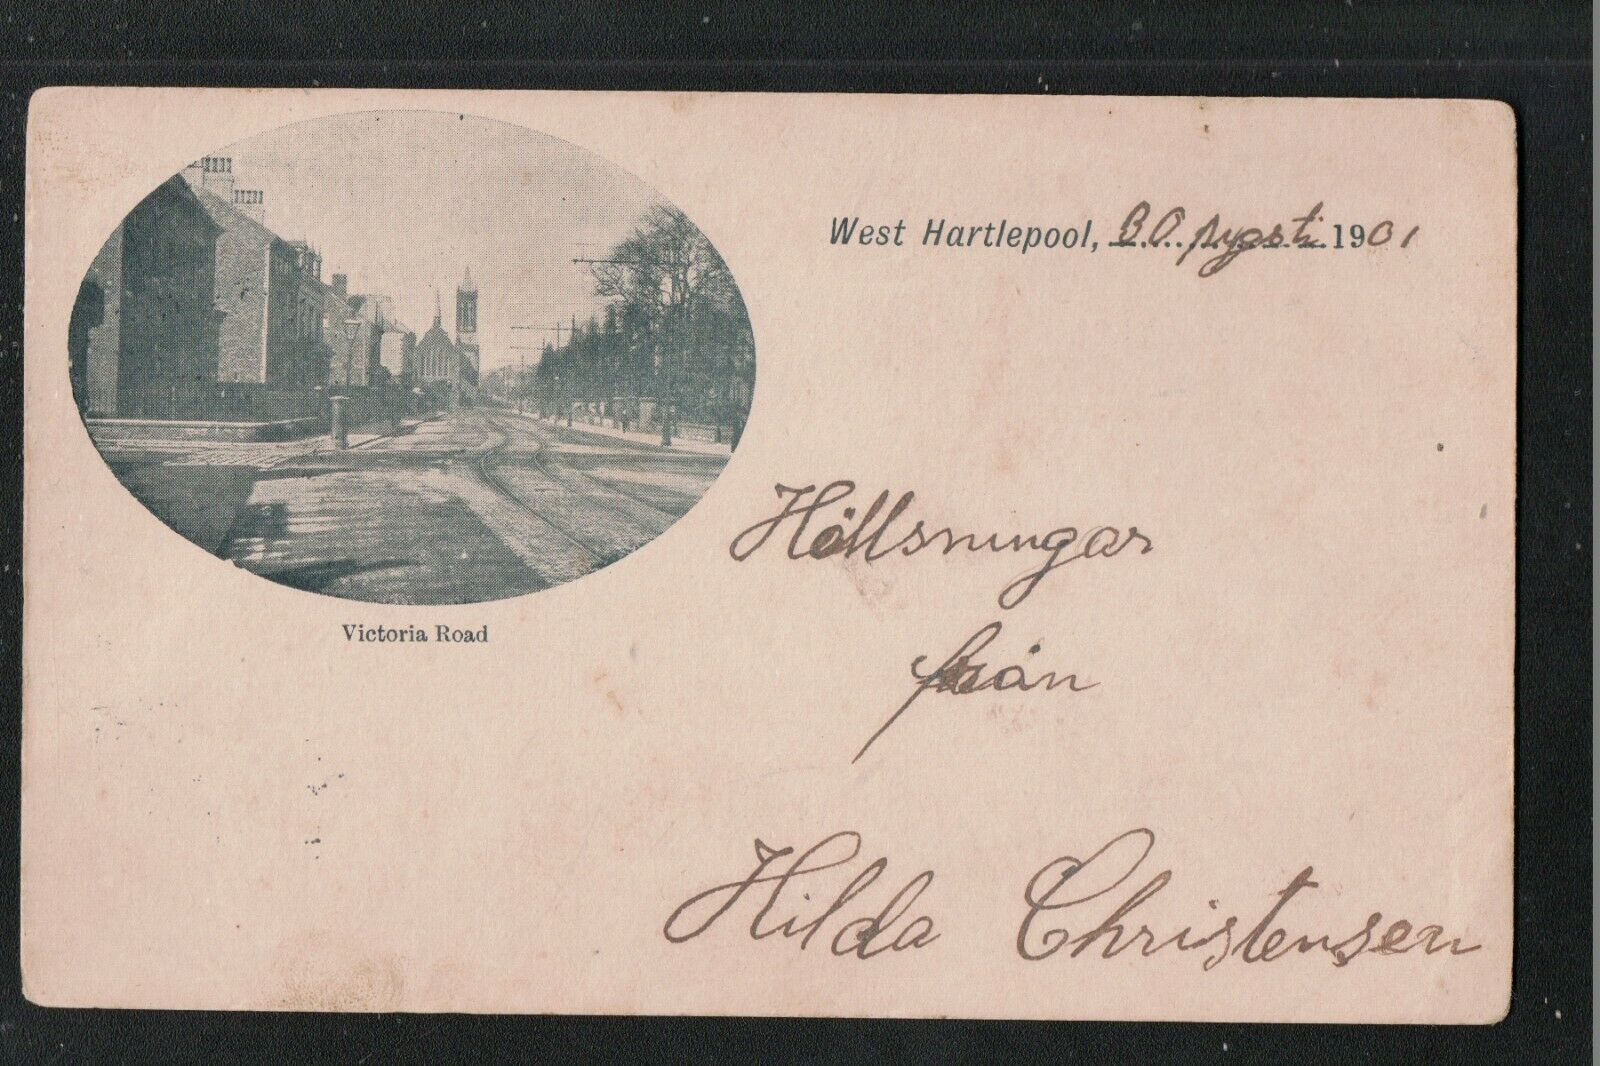 House Clearance - Victoria Road West Hartlepool 1901 Un-Divided back Service ~ Posted Abroad